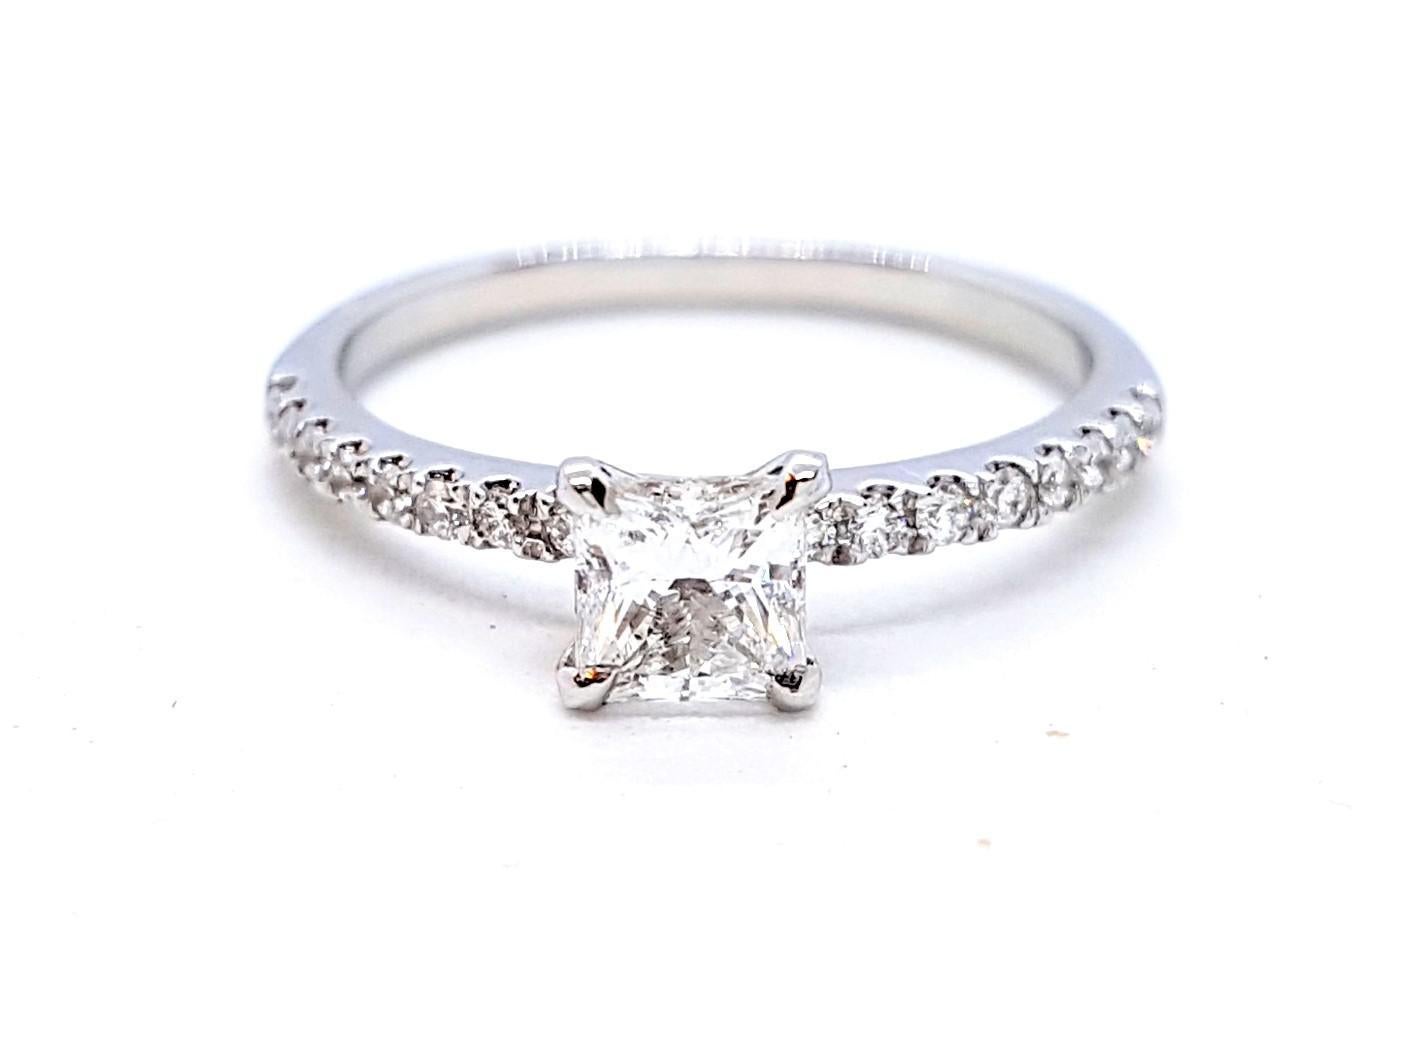 Solitary white gold 750 mils (18 carats). set with a central princess cut diamond E-SI1 0.50 ct HRD certified. and supported 16 round brilliant cut diamonds 0.16 ct total ring size: 53 width across the top 0.45 cm width of the ring: 0.14 cm. total